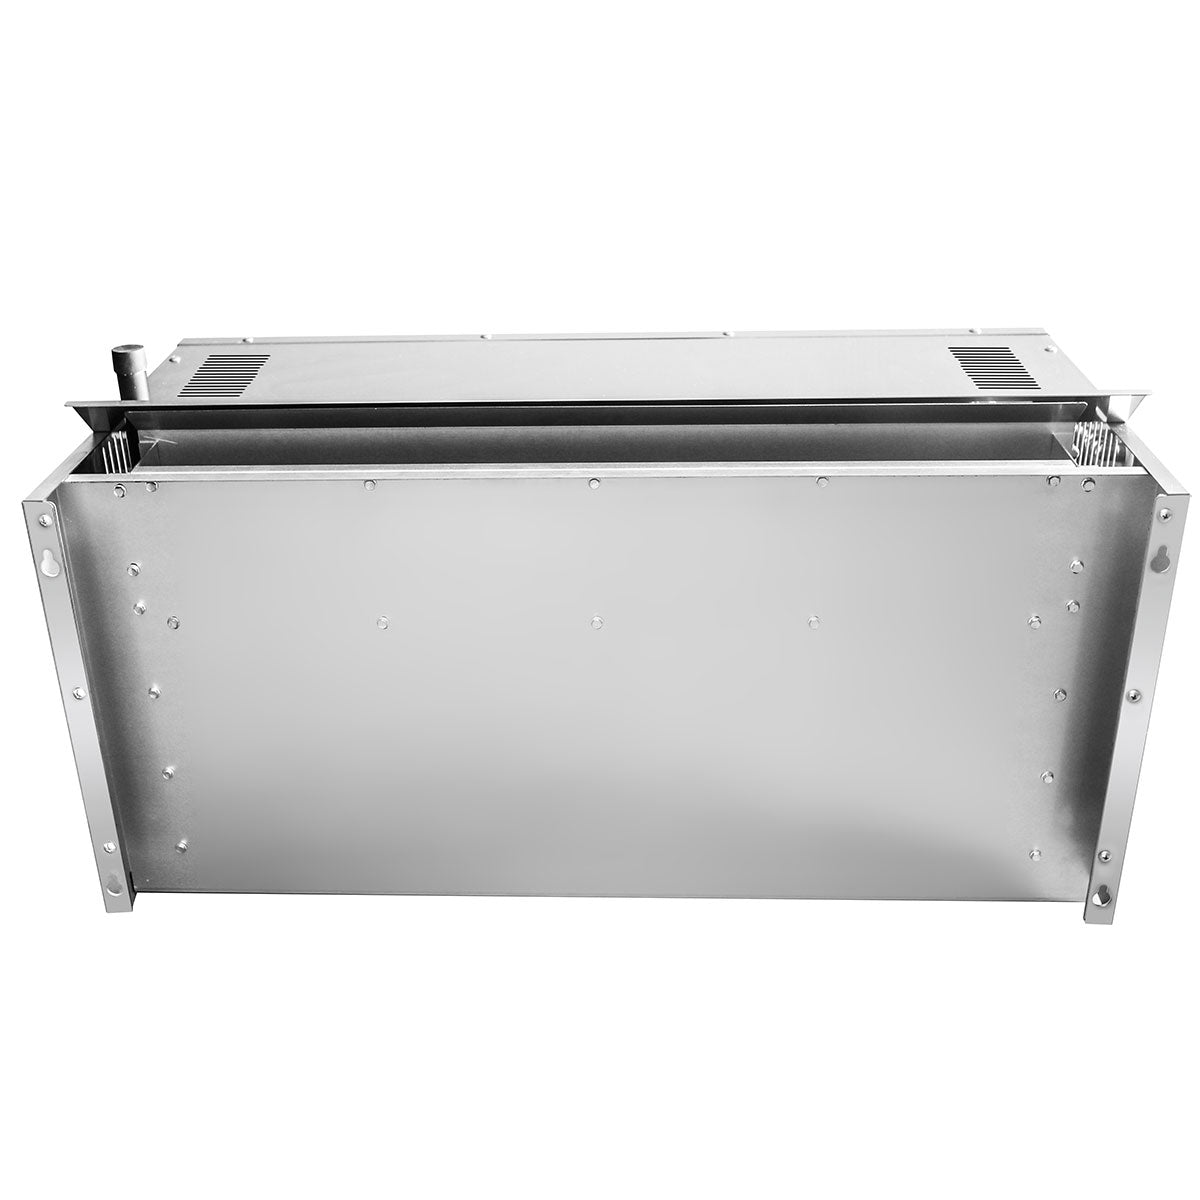 Atosa ATCM-36* 36'' Cheesemelter with Total 35,000 B.T.U/ Range Mounting Kit Included